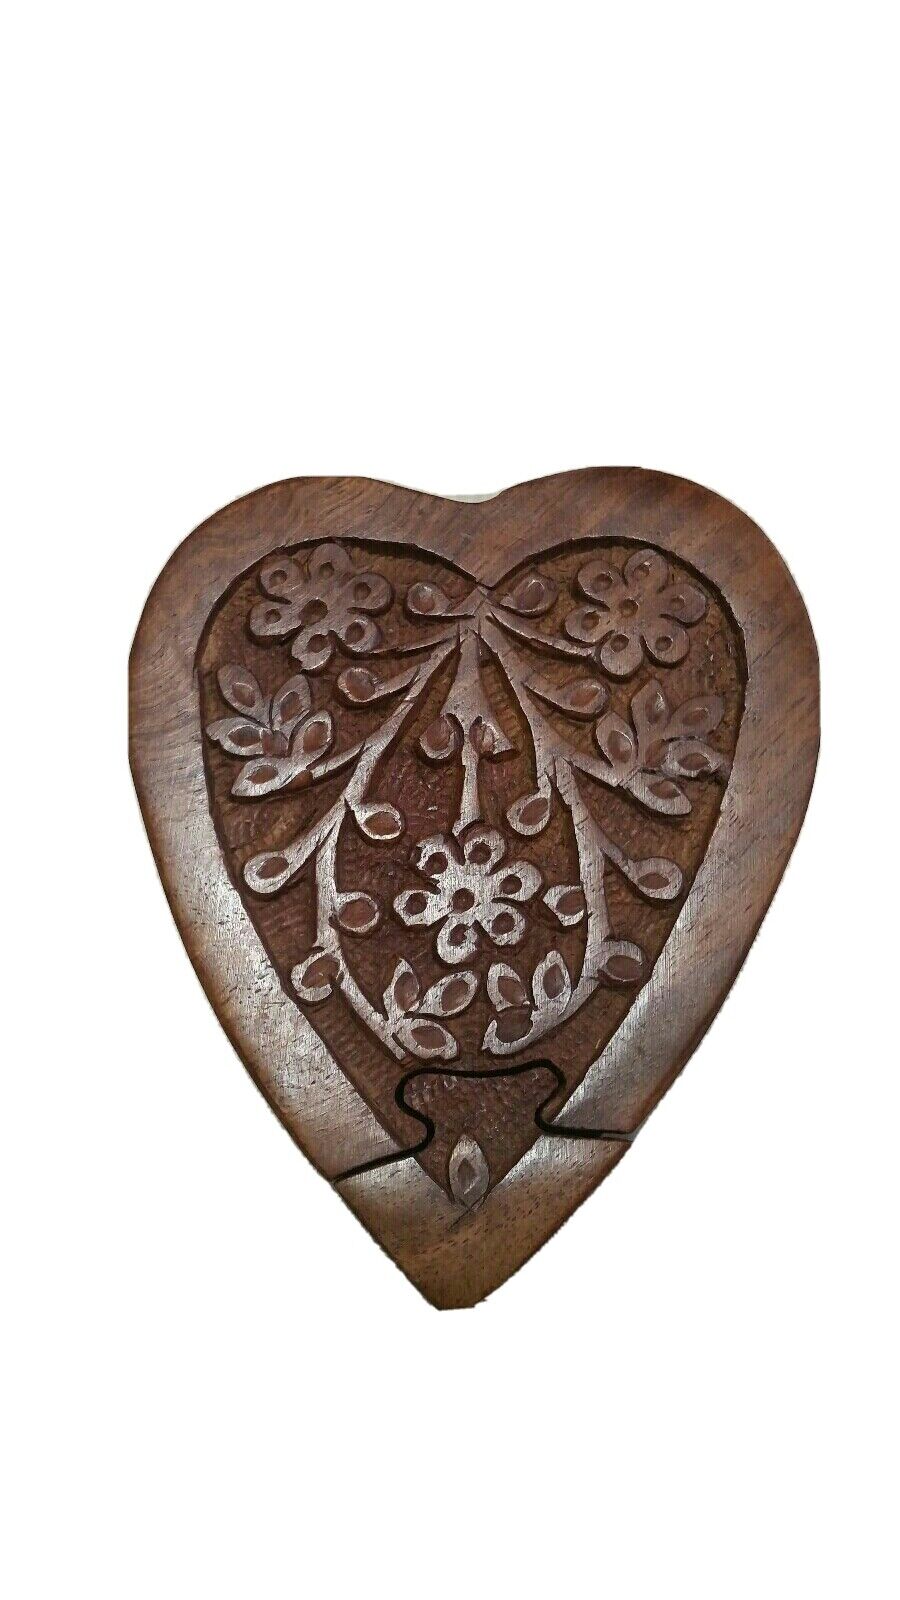 Hand Made Wooden Heart Shaped Puzzle Trinket Box Carved Floral Design Cover